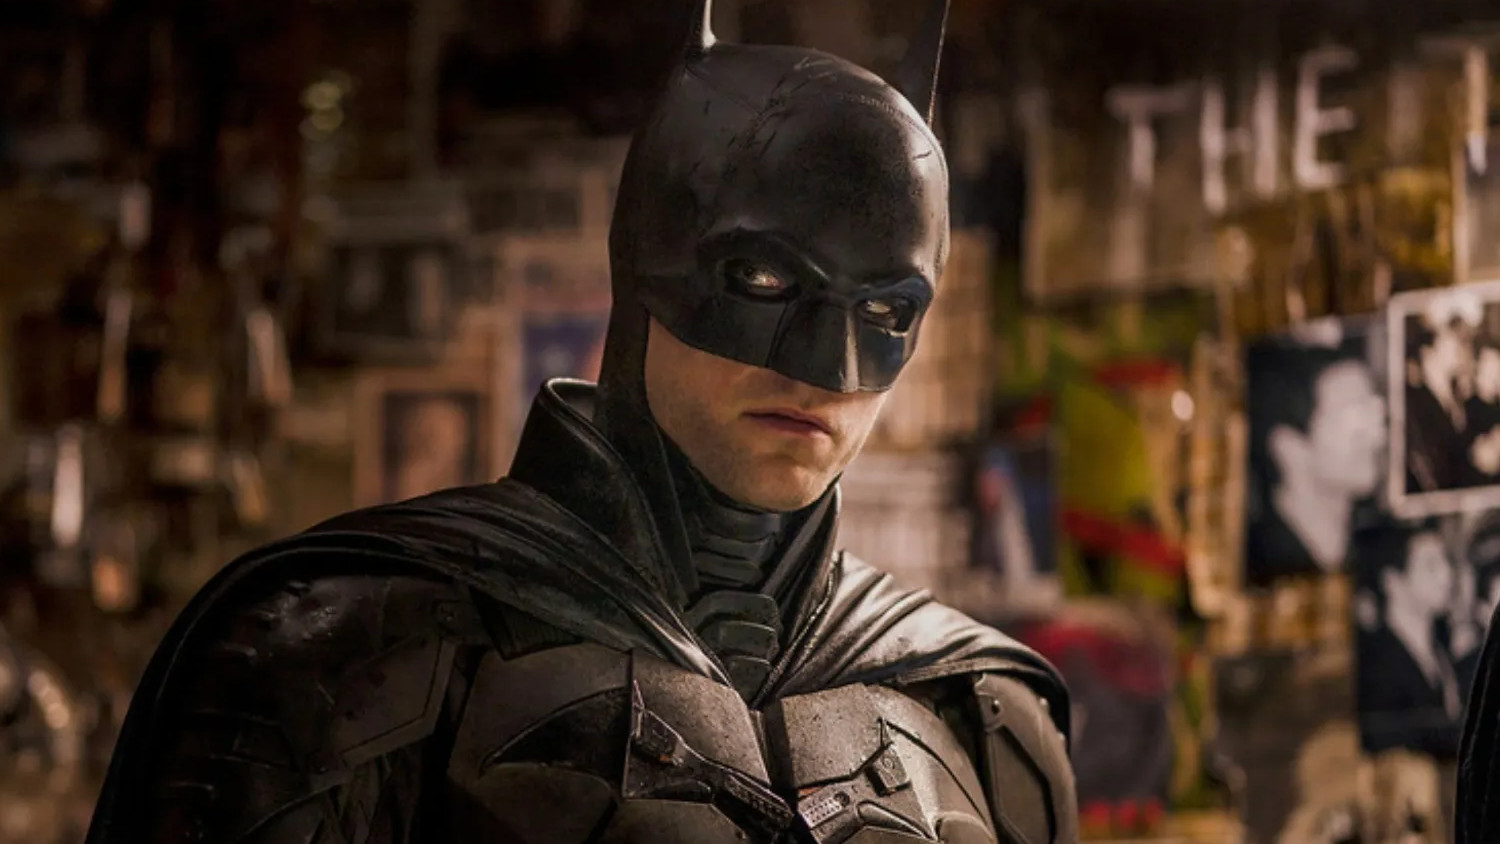 The Batman 2 Release Date Pushed Back A Year